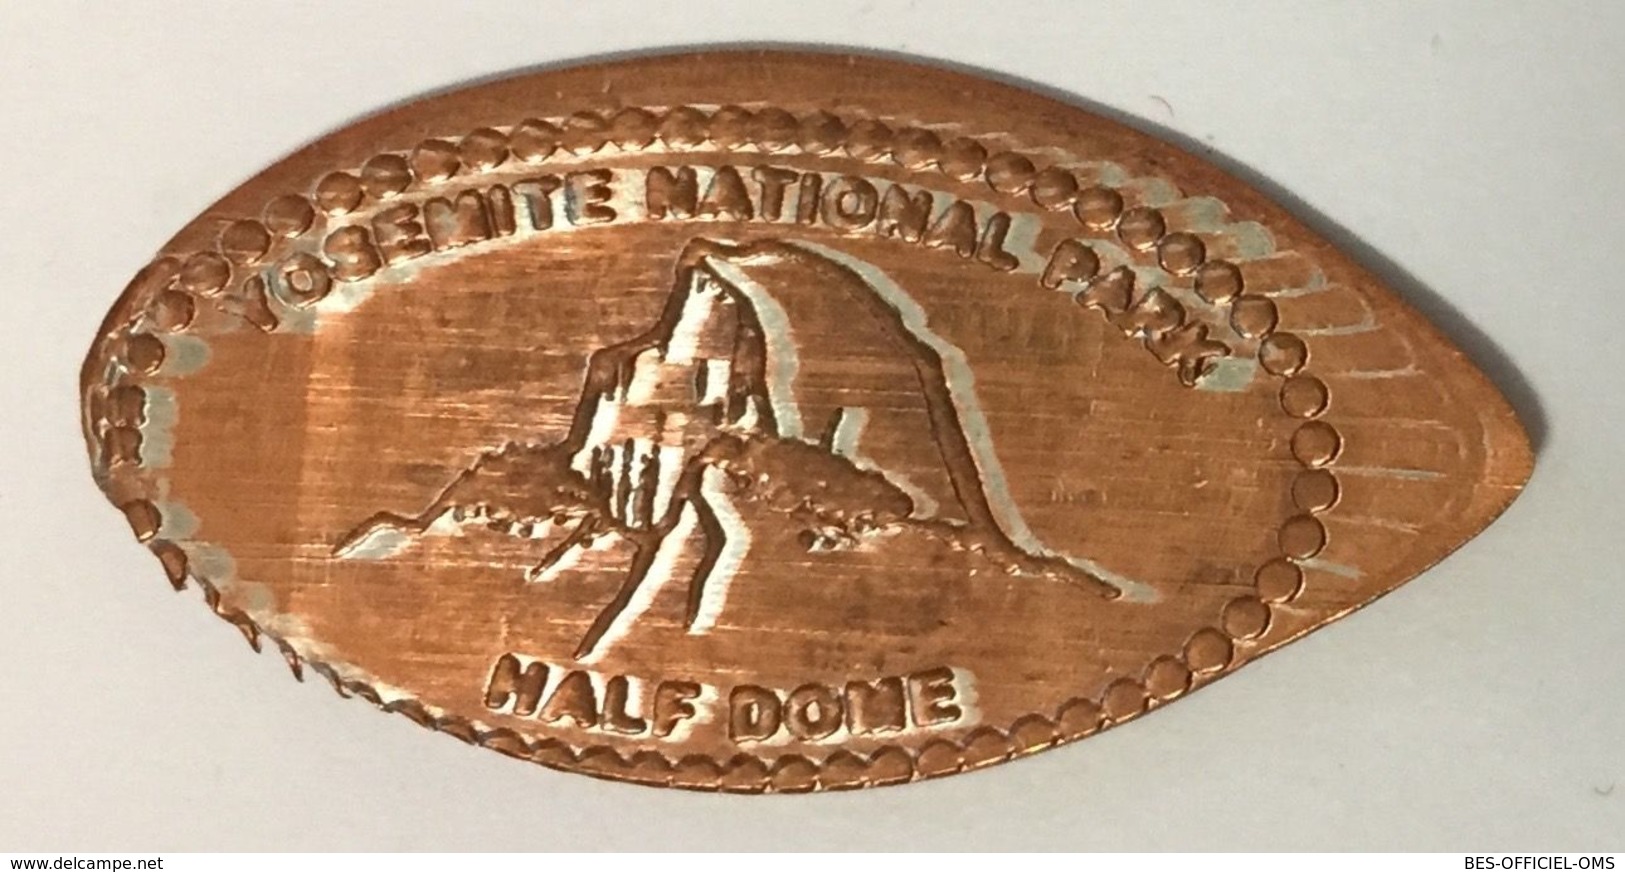 ÉTATS-UNIS USA YOSEMITE NATIONAL PARK MALF DOME 1965-2015 NICELY'S PENNY ELONGATED COIN PIÈCE ÉCRASÉE MEDALS TOKENS - Elongated Coins